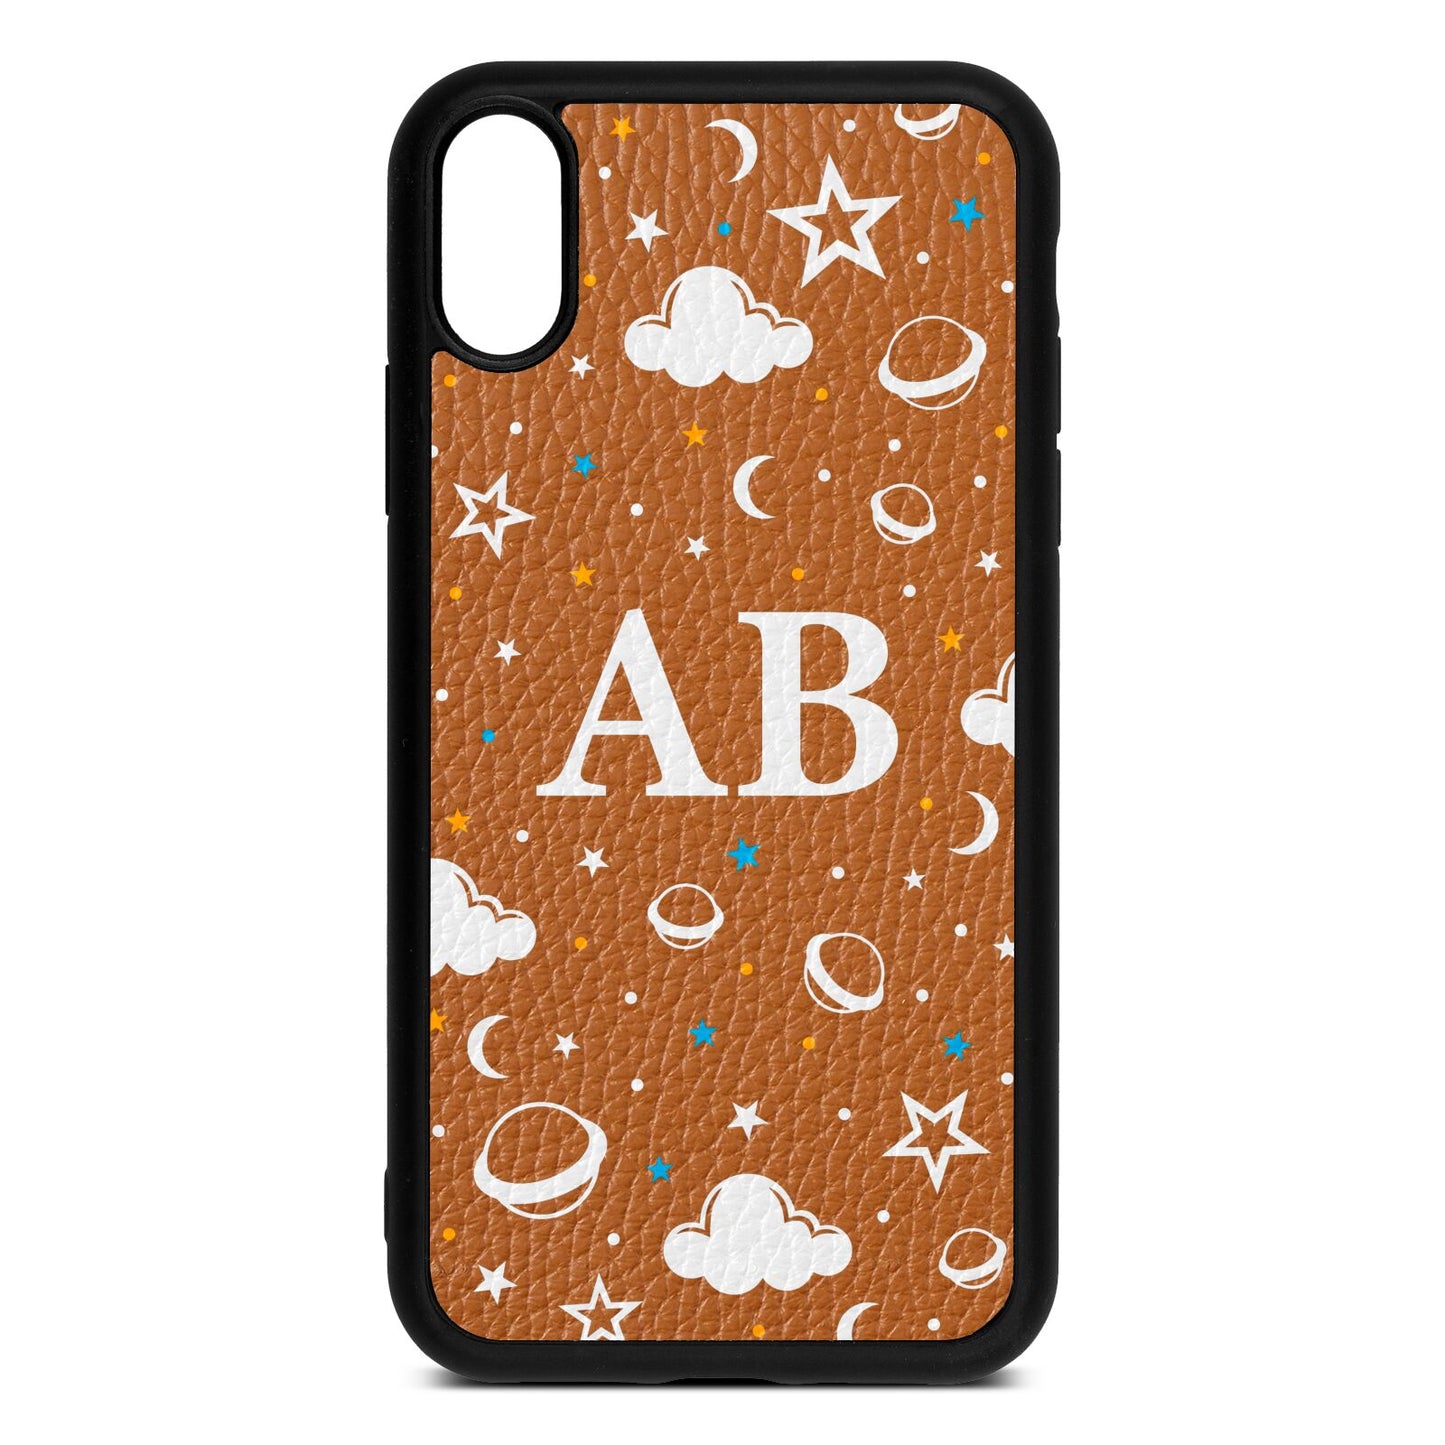 Astronomical Initials Tan Pebble Leather iPhone Xr Case